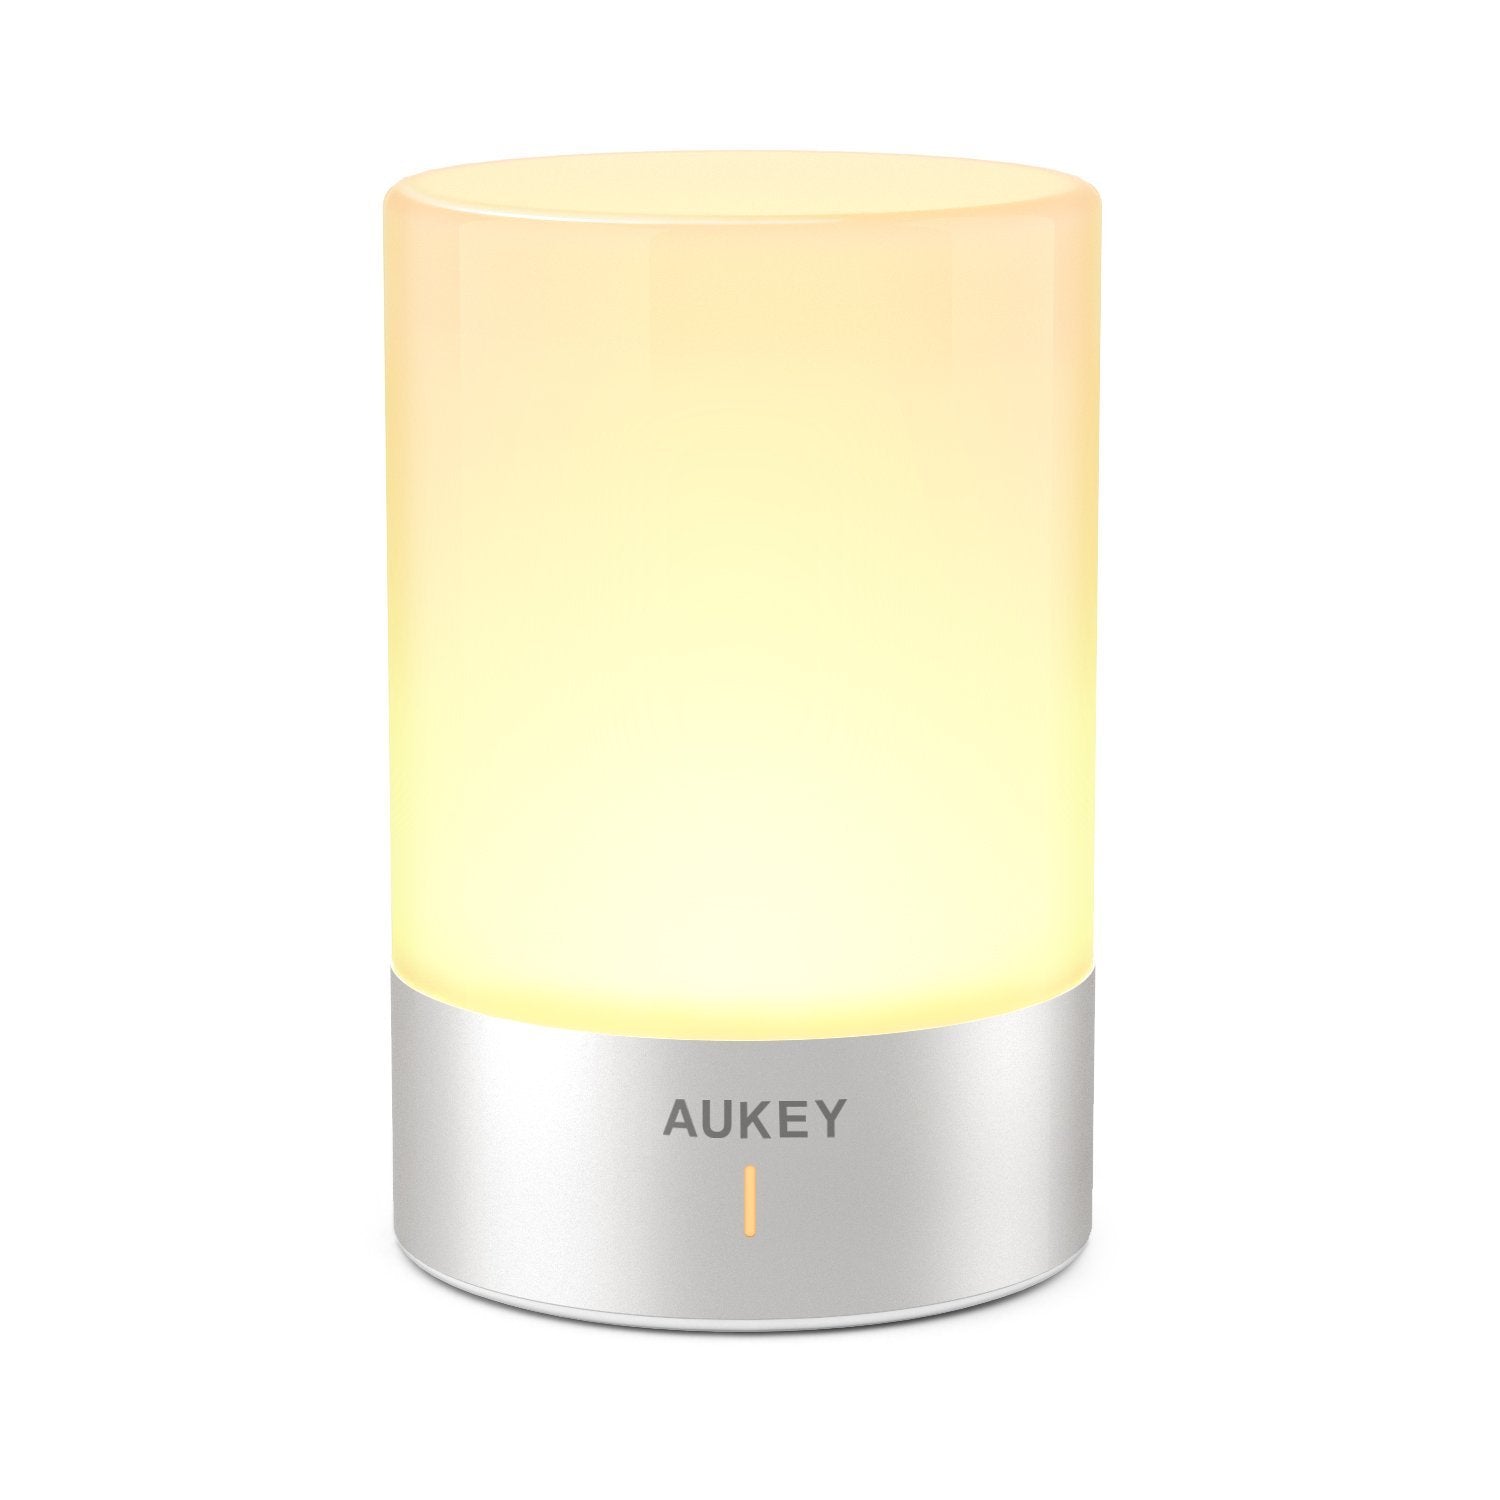 AUKEY LT-ST21 Mini Touch Control LED Desk Lamp - Aukey Malaysia Official Store